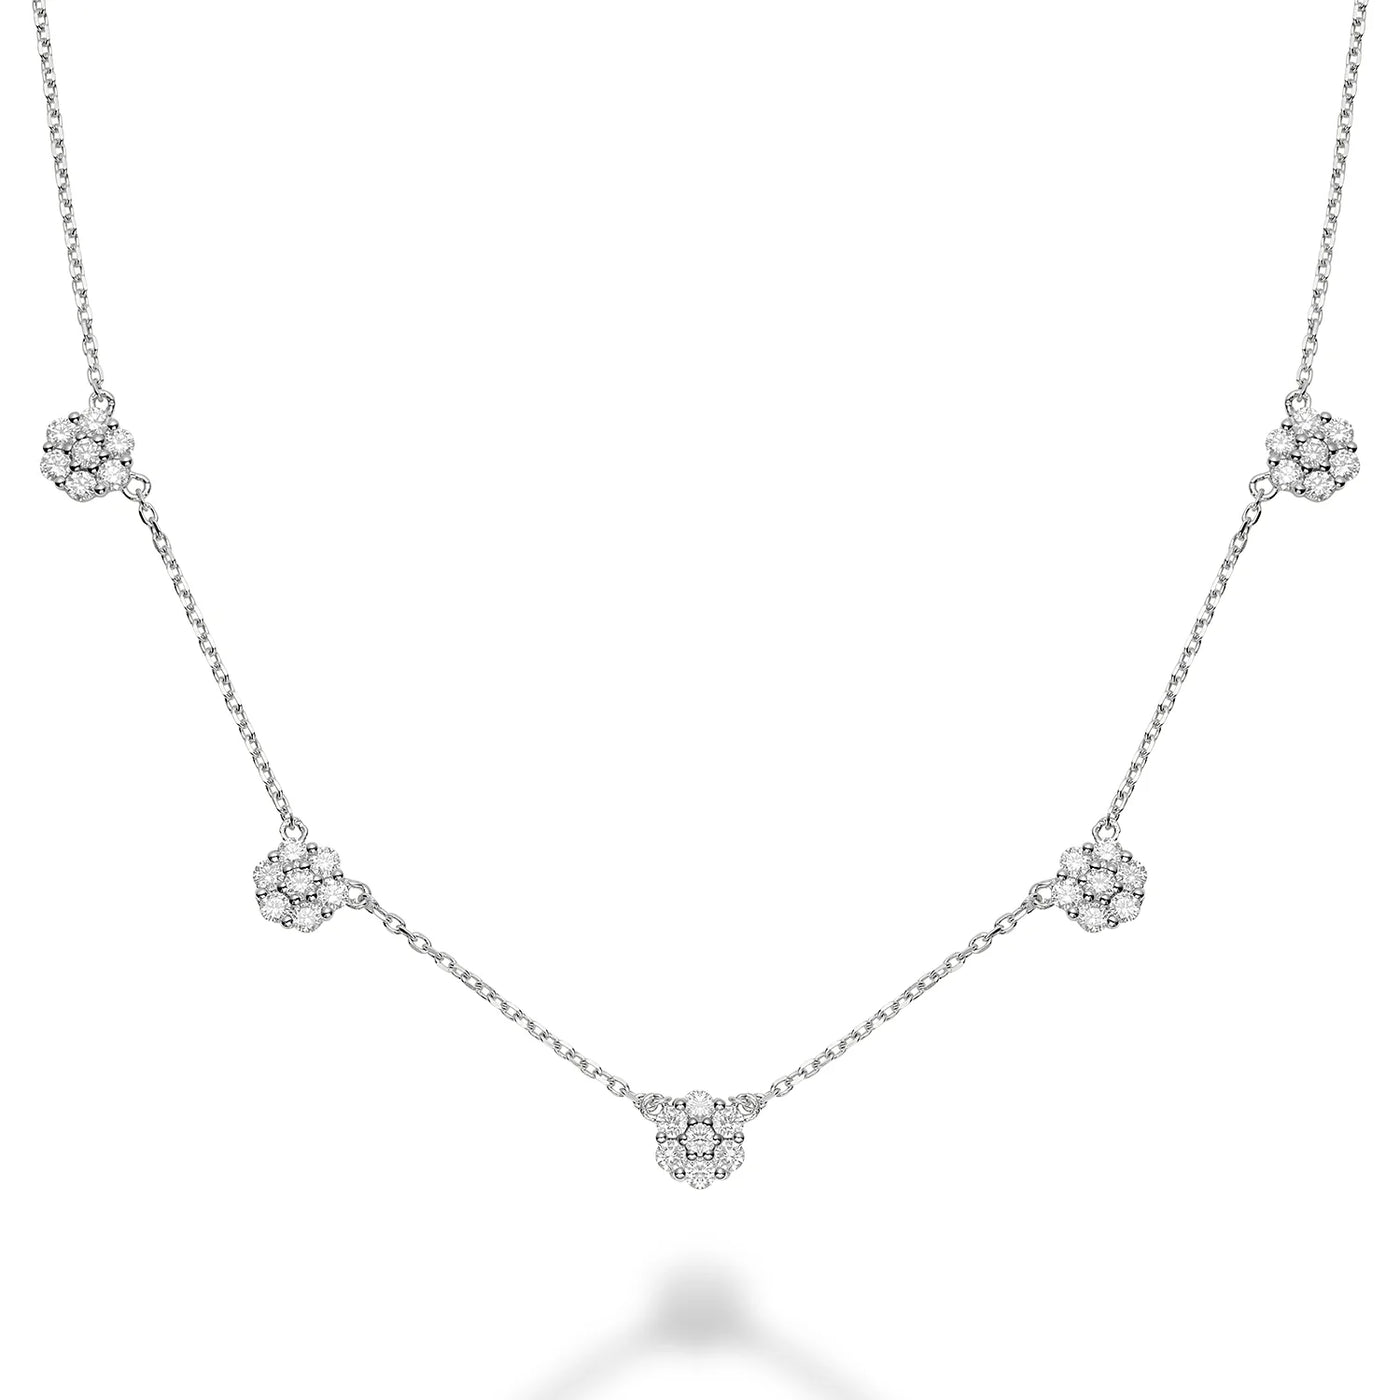 Flower Stationed Diamond Necklace